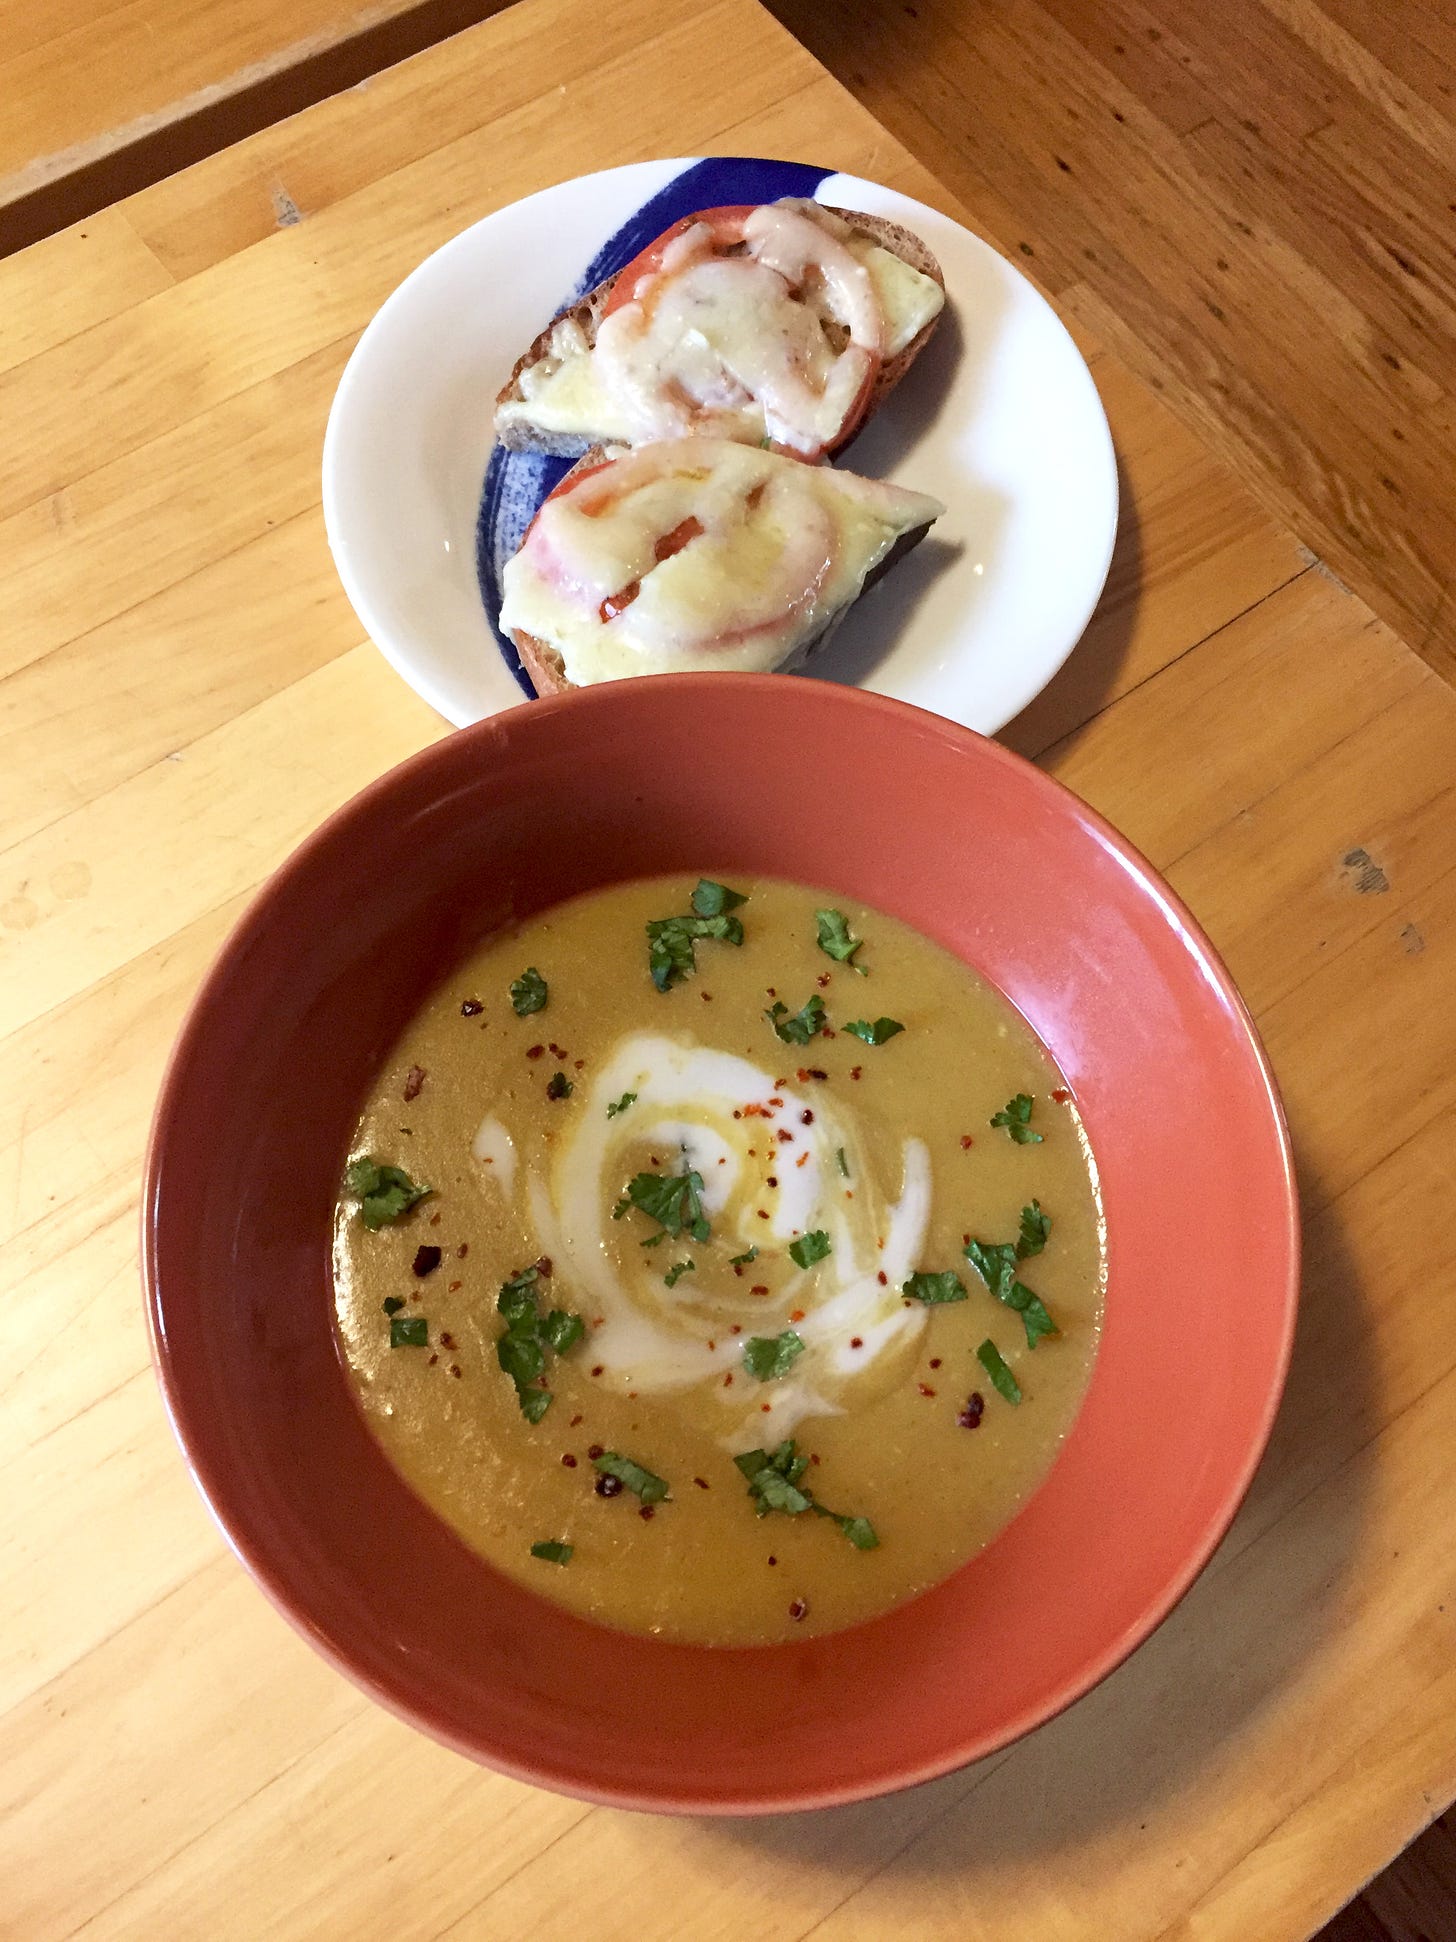 In an orange bowl, a thick and deep yellow soup swirled with coconut yogurt and sprinkled with cilantro and chili flakes. On a plate behind it and to the right is a slice of cheese toast with tomato, sliced in half.